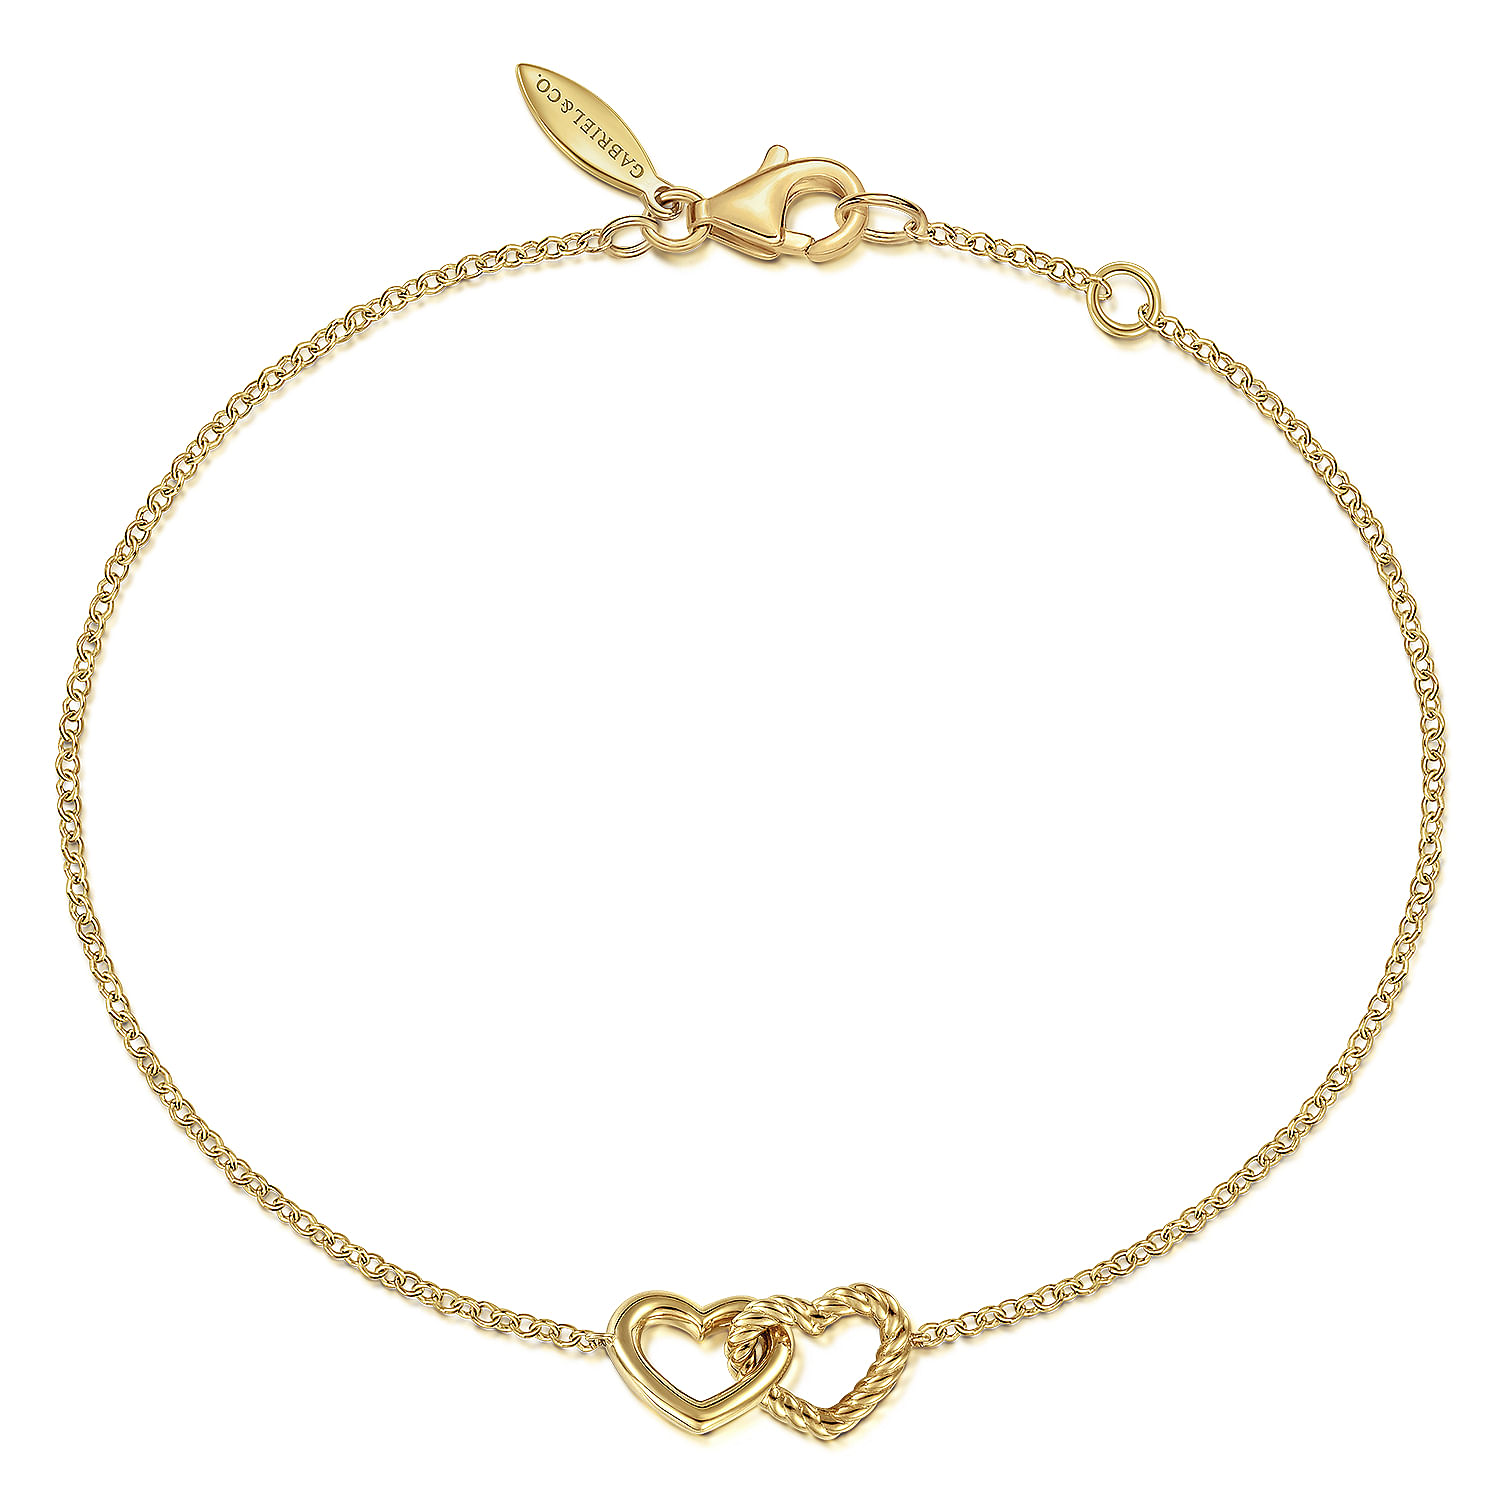 14K Yellow Gold Chain Bracelet with Entwined Hearts